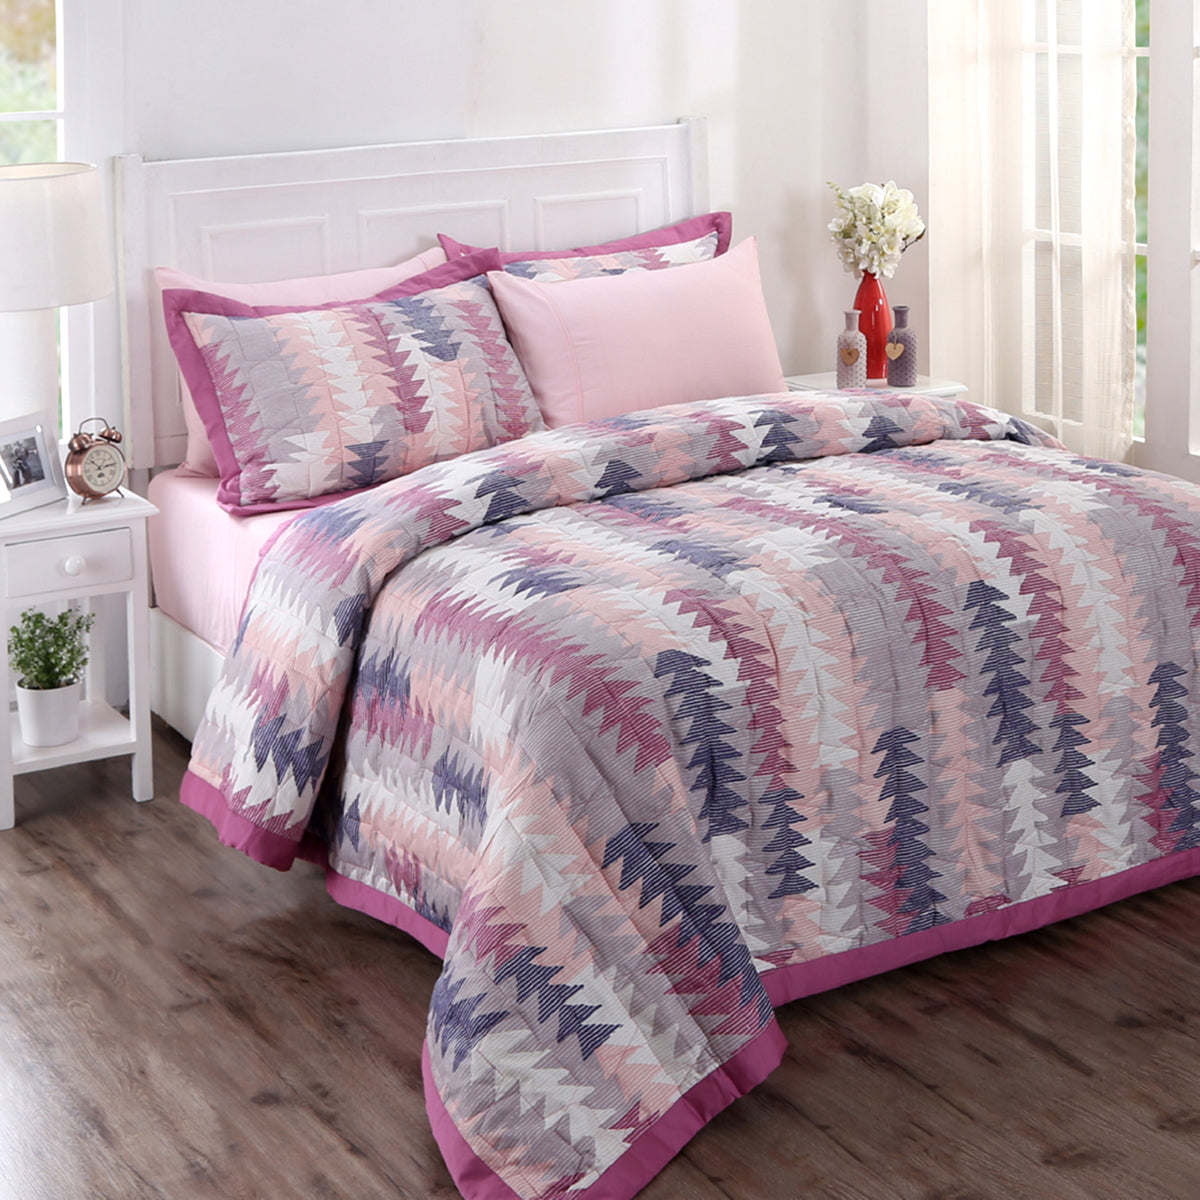 Co-Exist Pinon Summer AC Quilt/Quilted Bed Cover/Comforter Purple